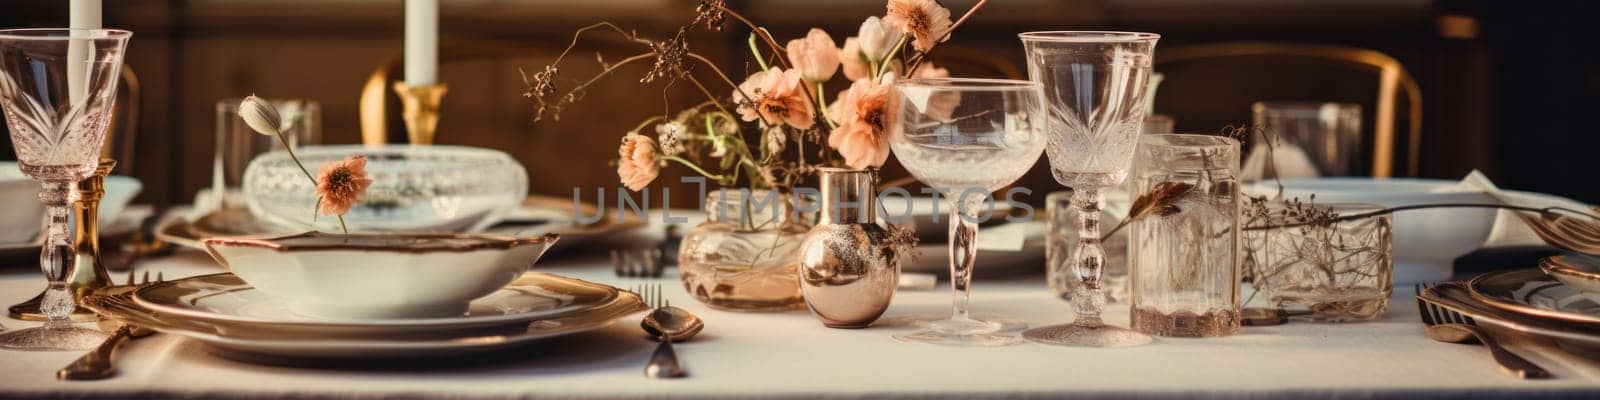 A table set for a formal dinner with champagne glasses and plates, AI by starush